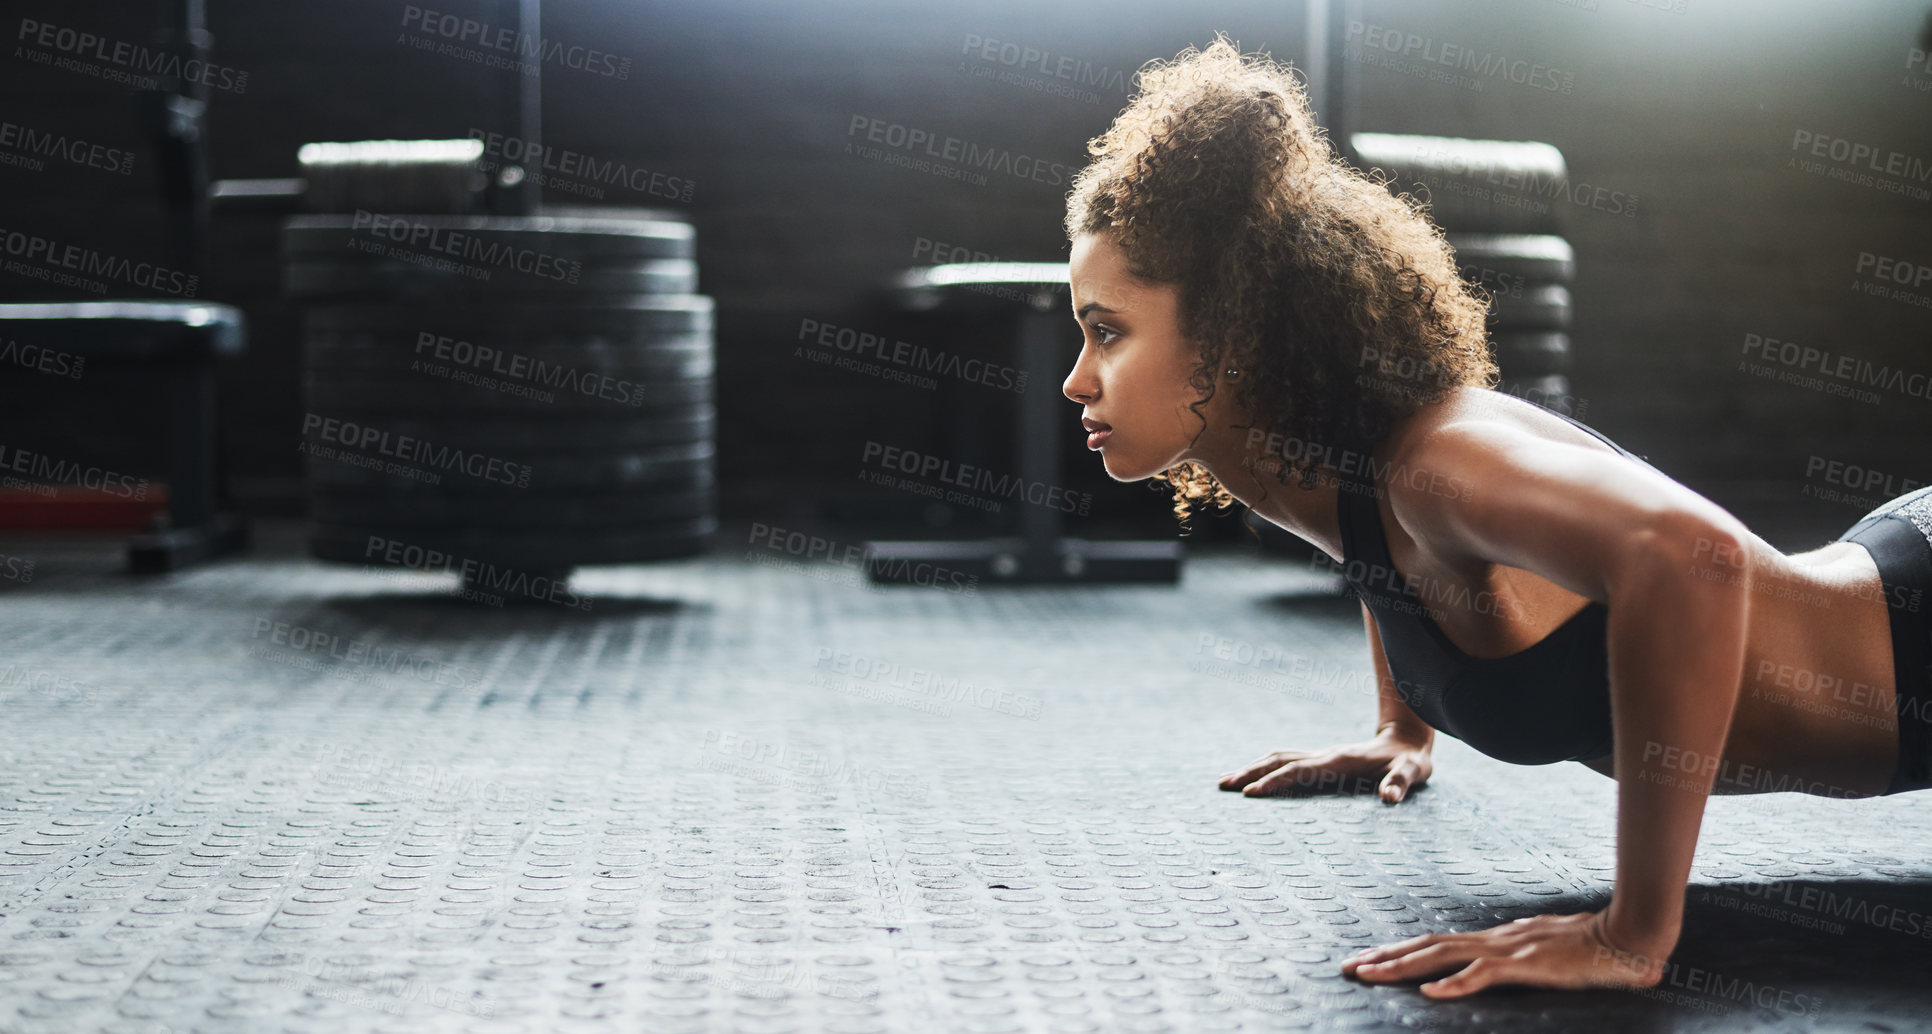 Buy stock photo Shot of a young woman doing pushups in a gym